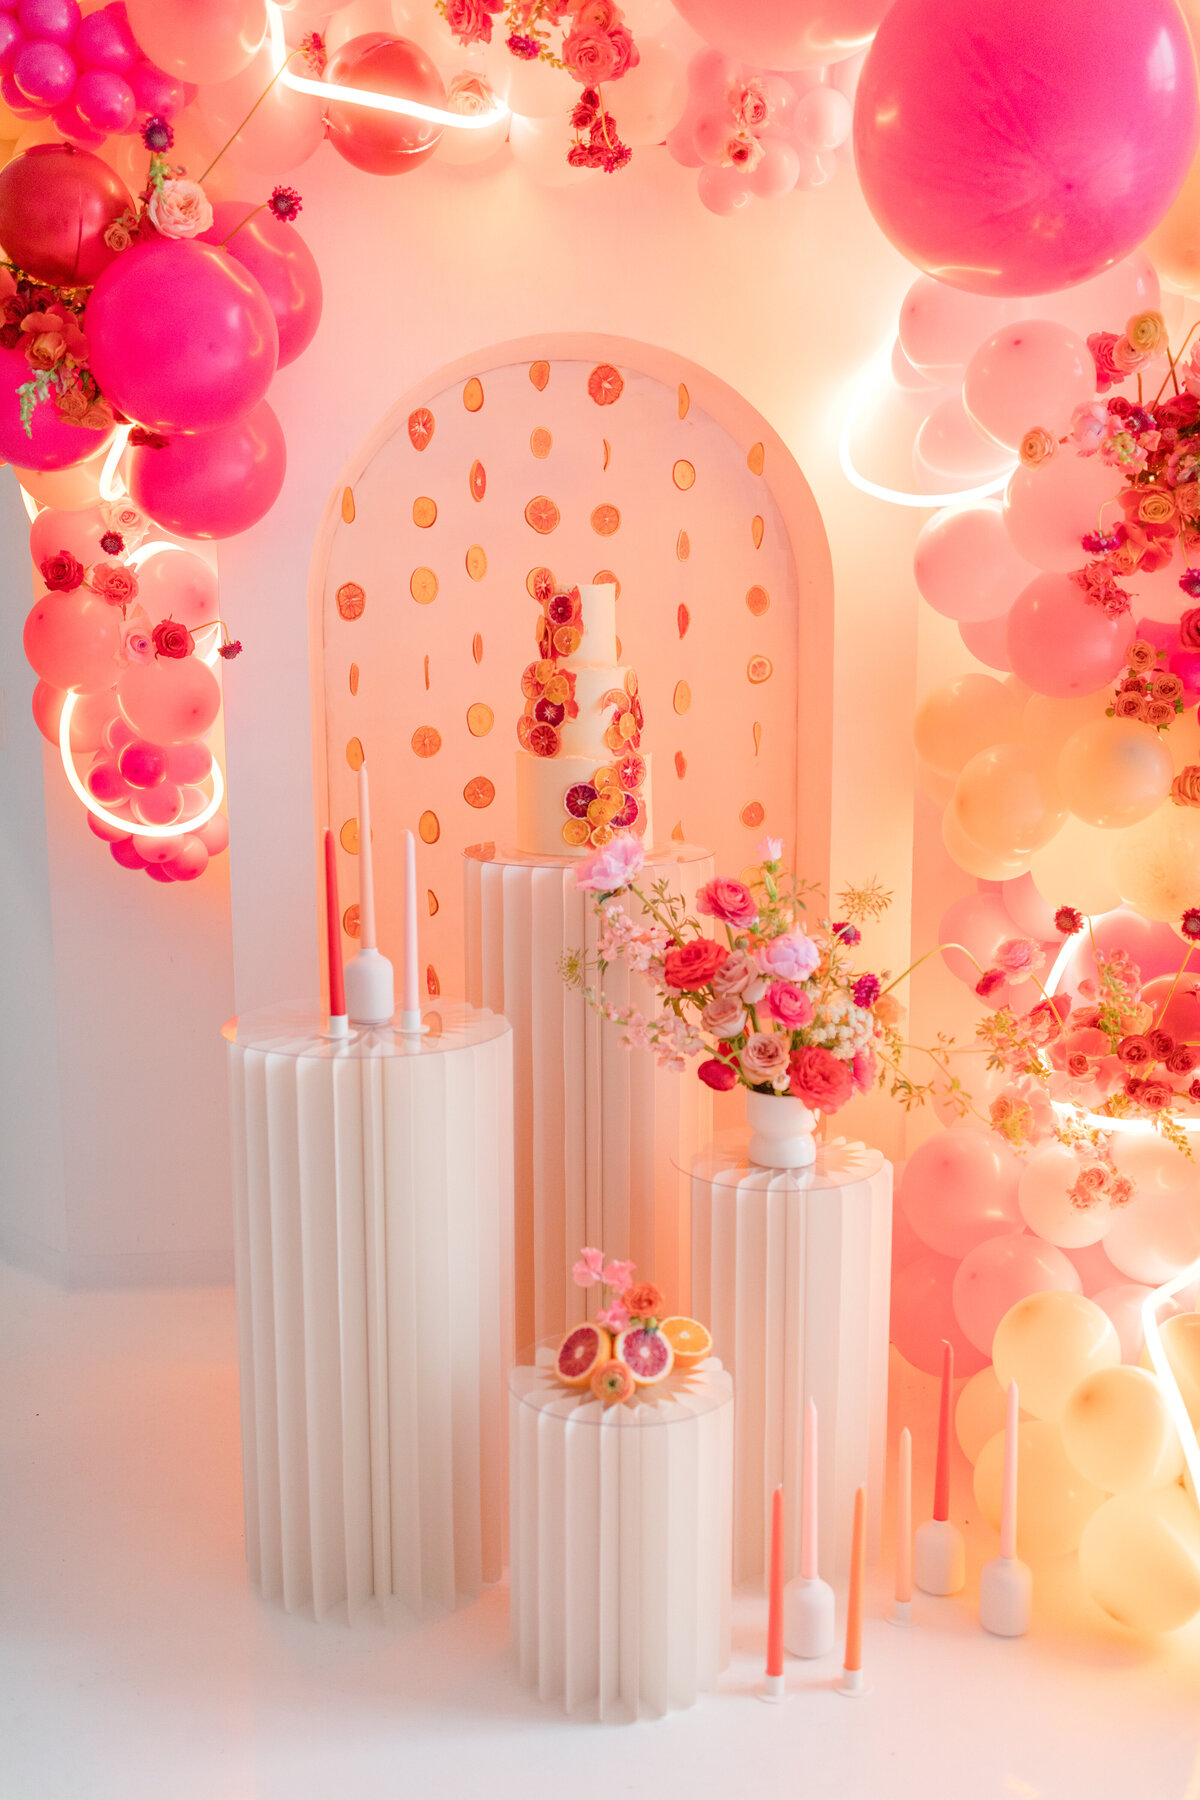 balloon arch surrounded cake and floral displays